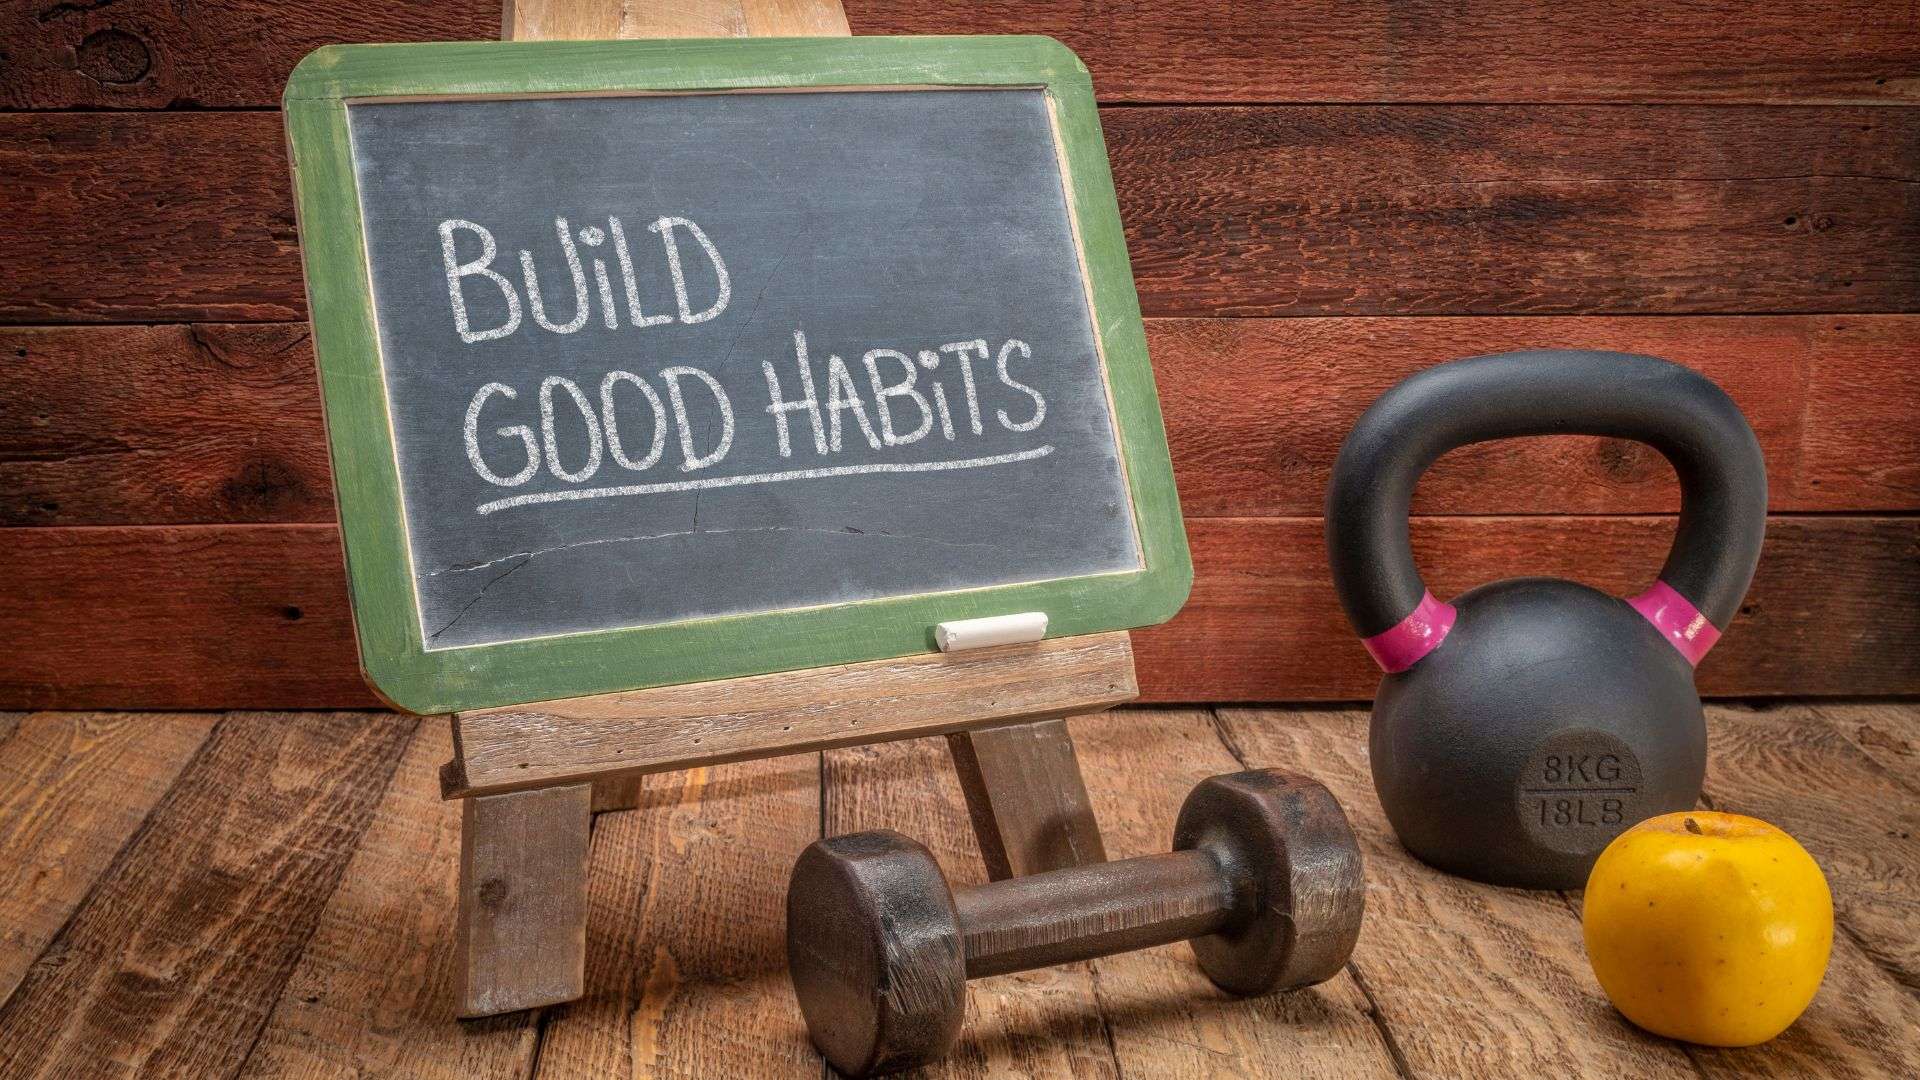 Chalkboard with the words "Build Good Habits" surrounded by a dumbbell, a kettle bell, and an apple.